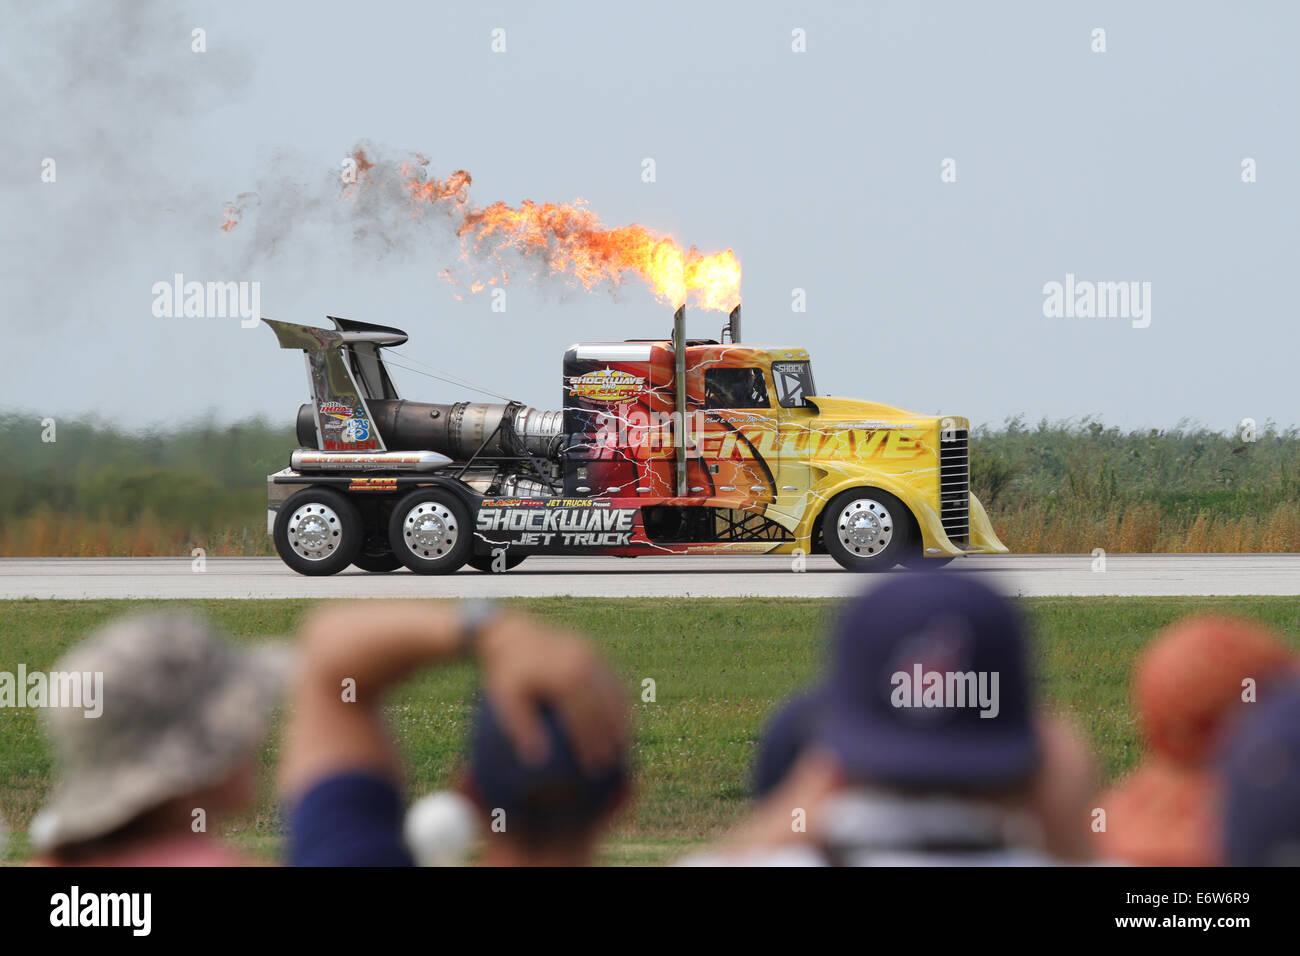 CLEVELAND, OHIO - August, 30: The Shockwave jet powered semi truck, on August, 30 2014 at The Cleveland National Airshow Stock Photo